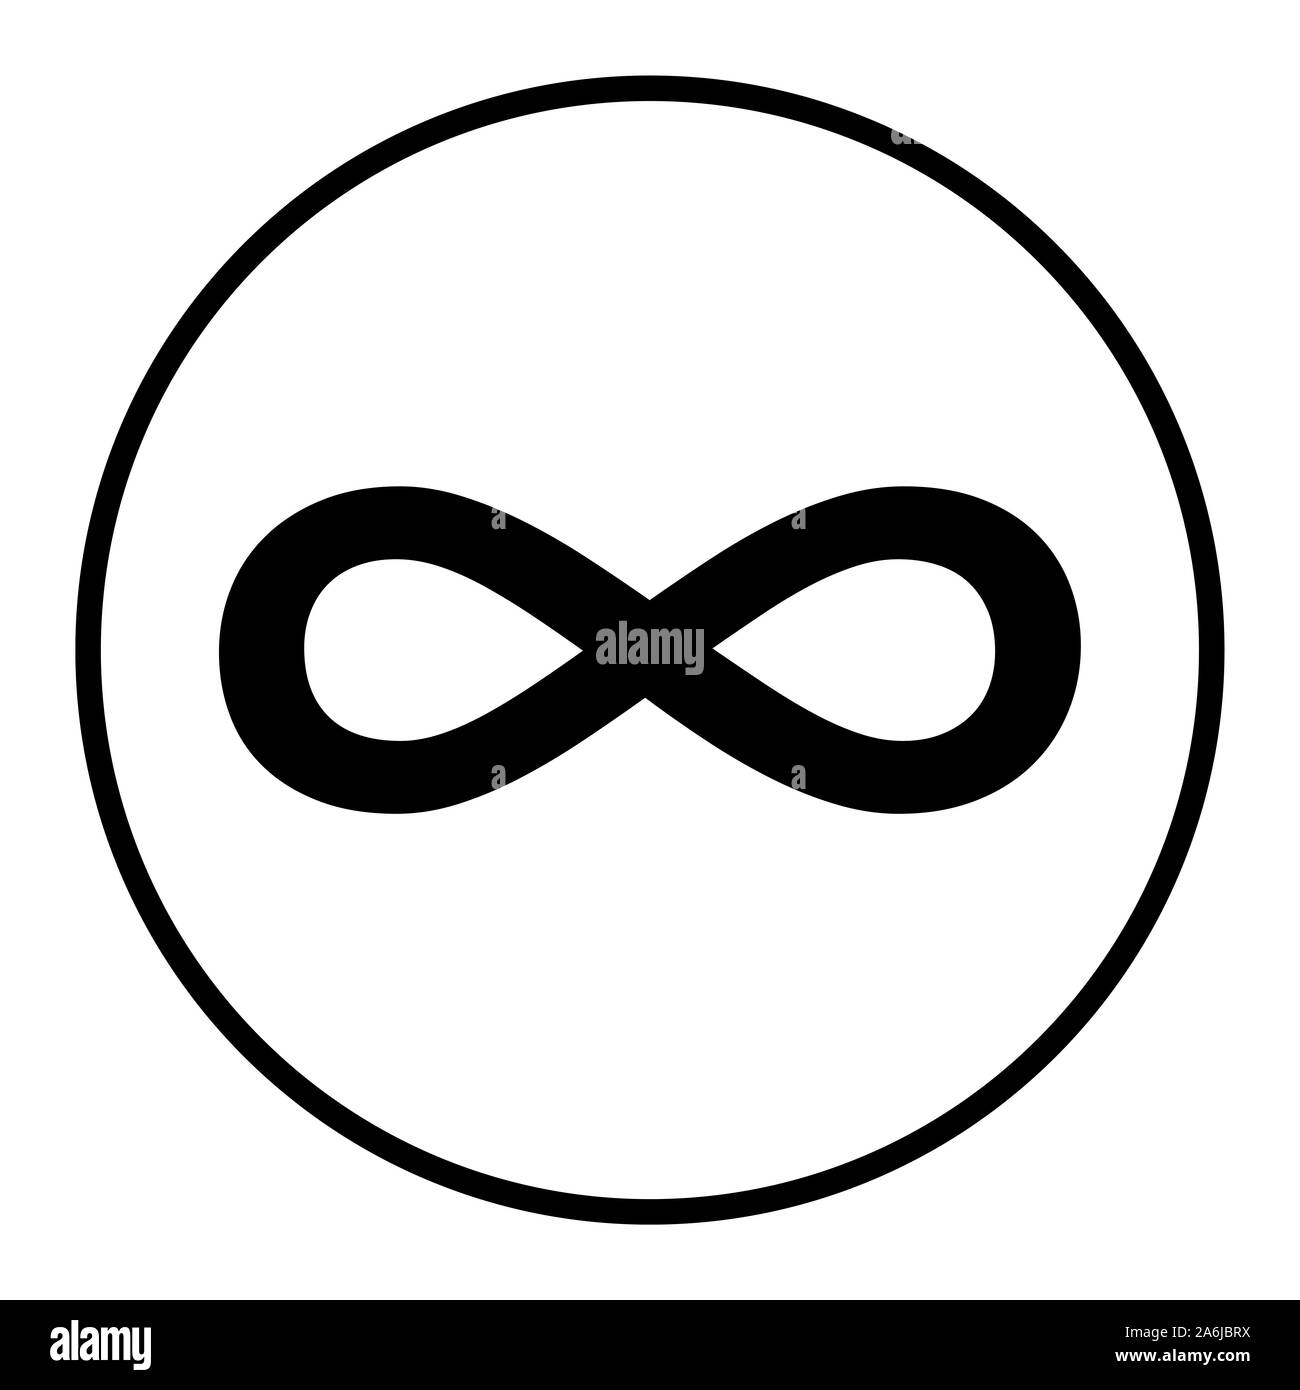 Infinity symbol icon in a circle Stock Photo